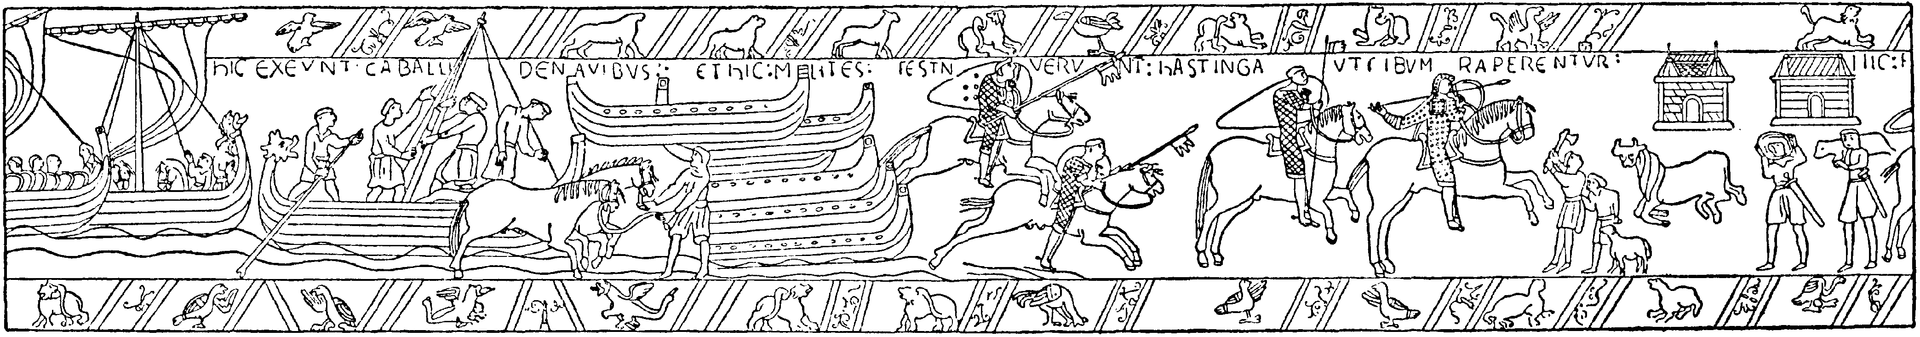 This section from the Bayeux Tapestry shows horses being unloaded during William the Conquerors invasion of England in 1066. He brought over 2000 horses with him across the Channel.8